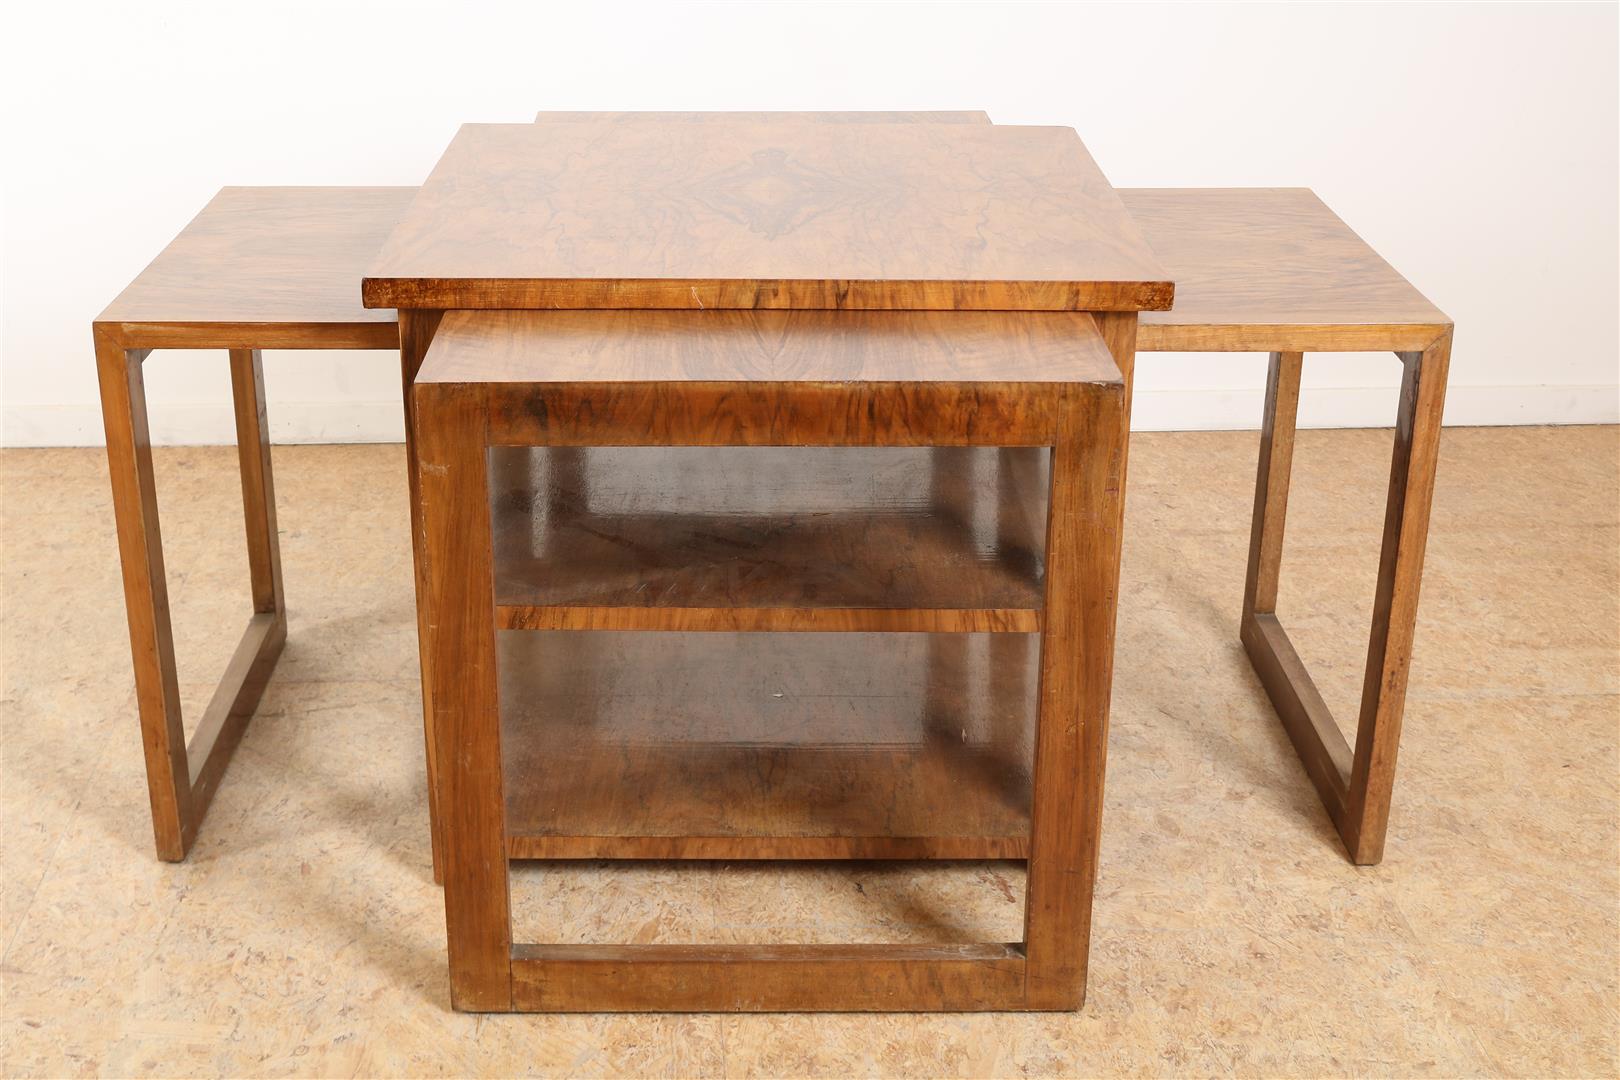 Burr walnut Art Deco side table with 4 extendable side leaves, resting block legs, 56 x 63 x 63 cm.